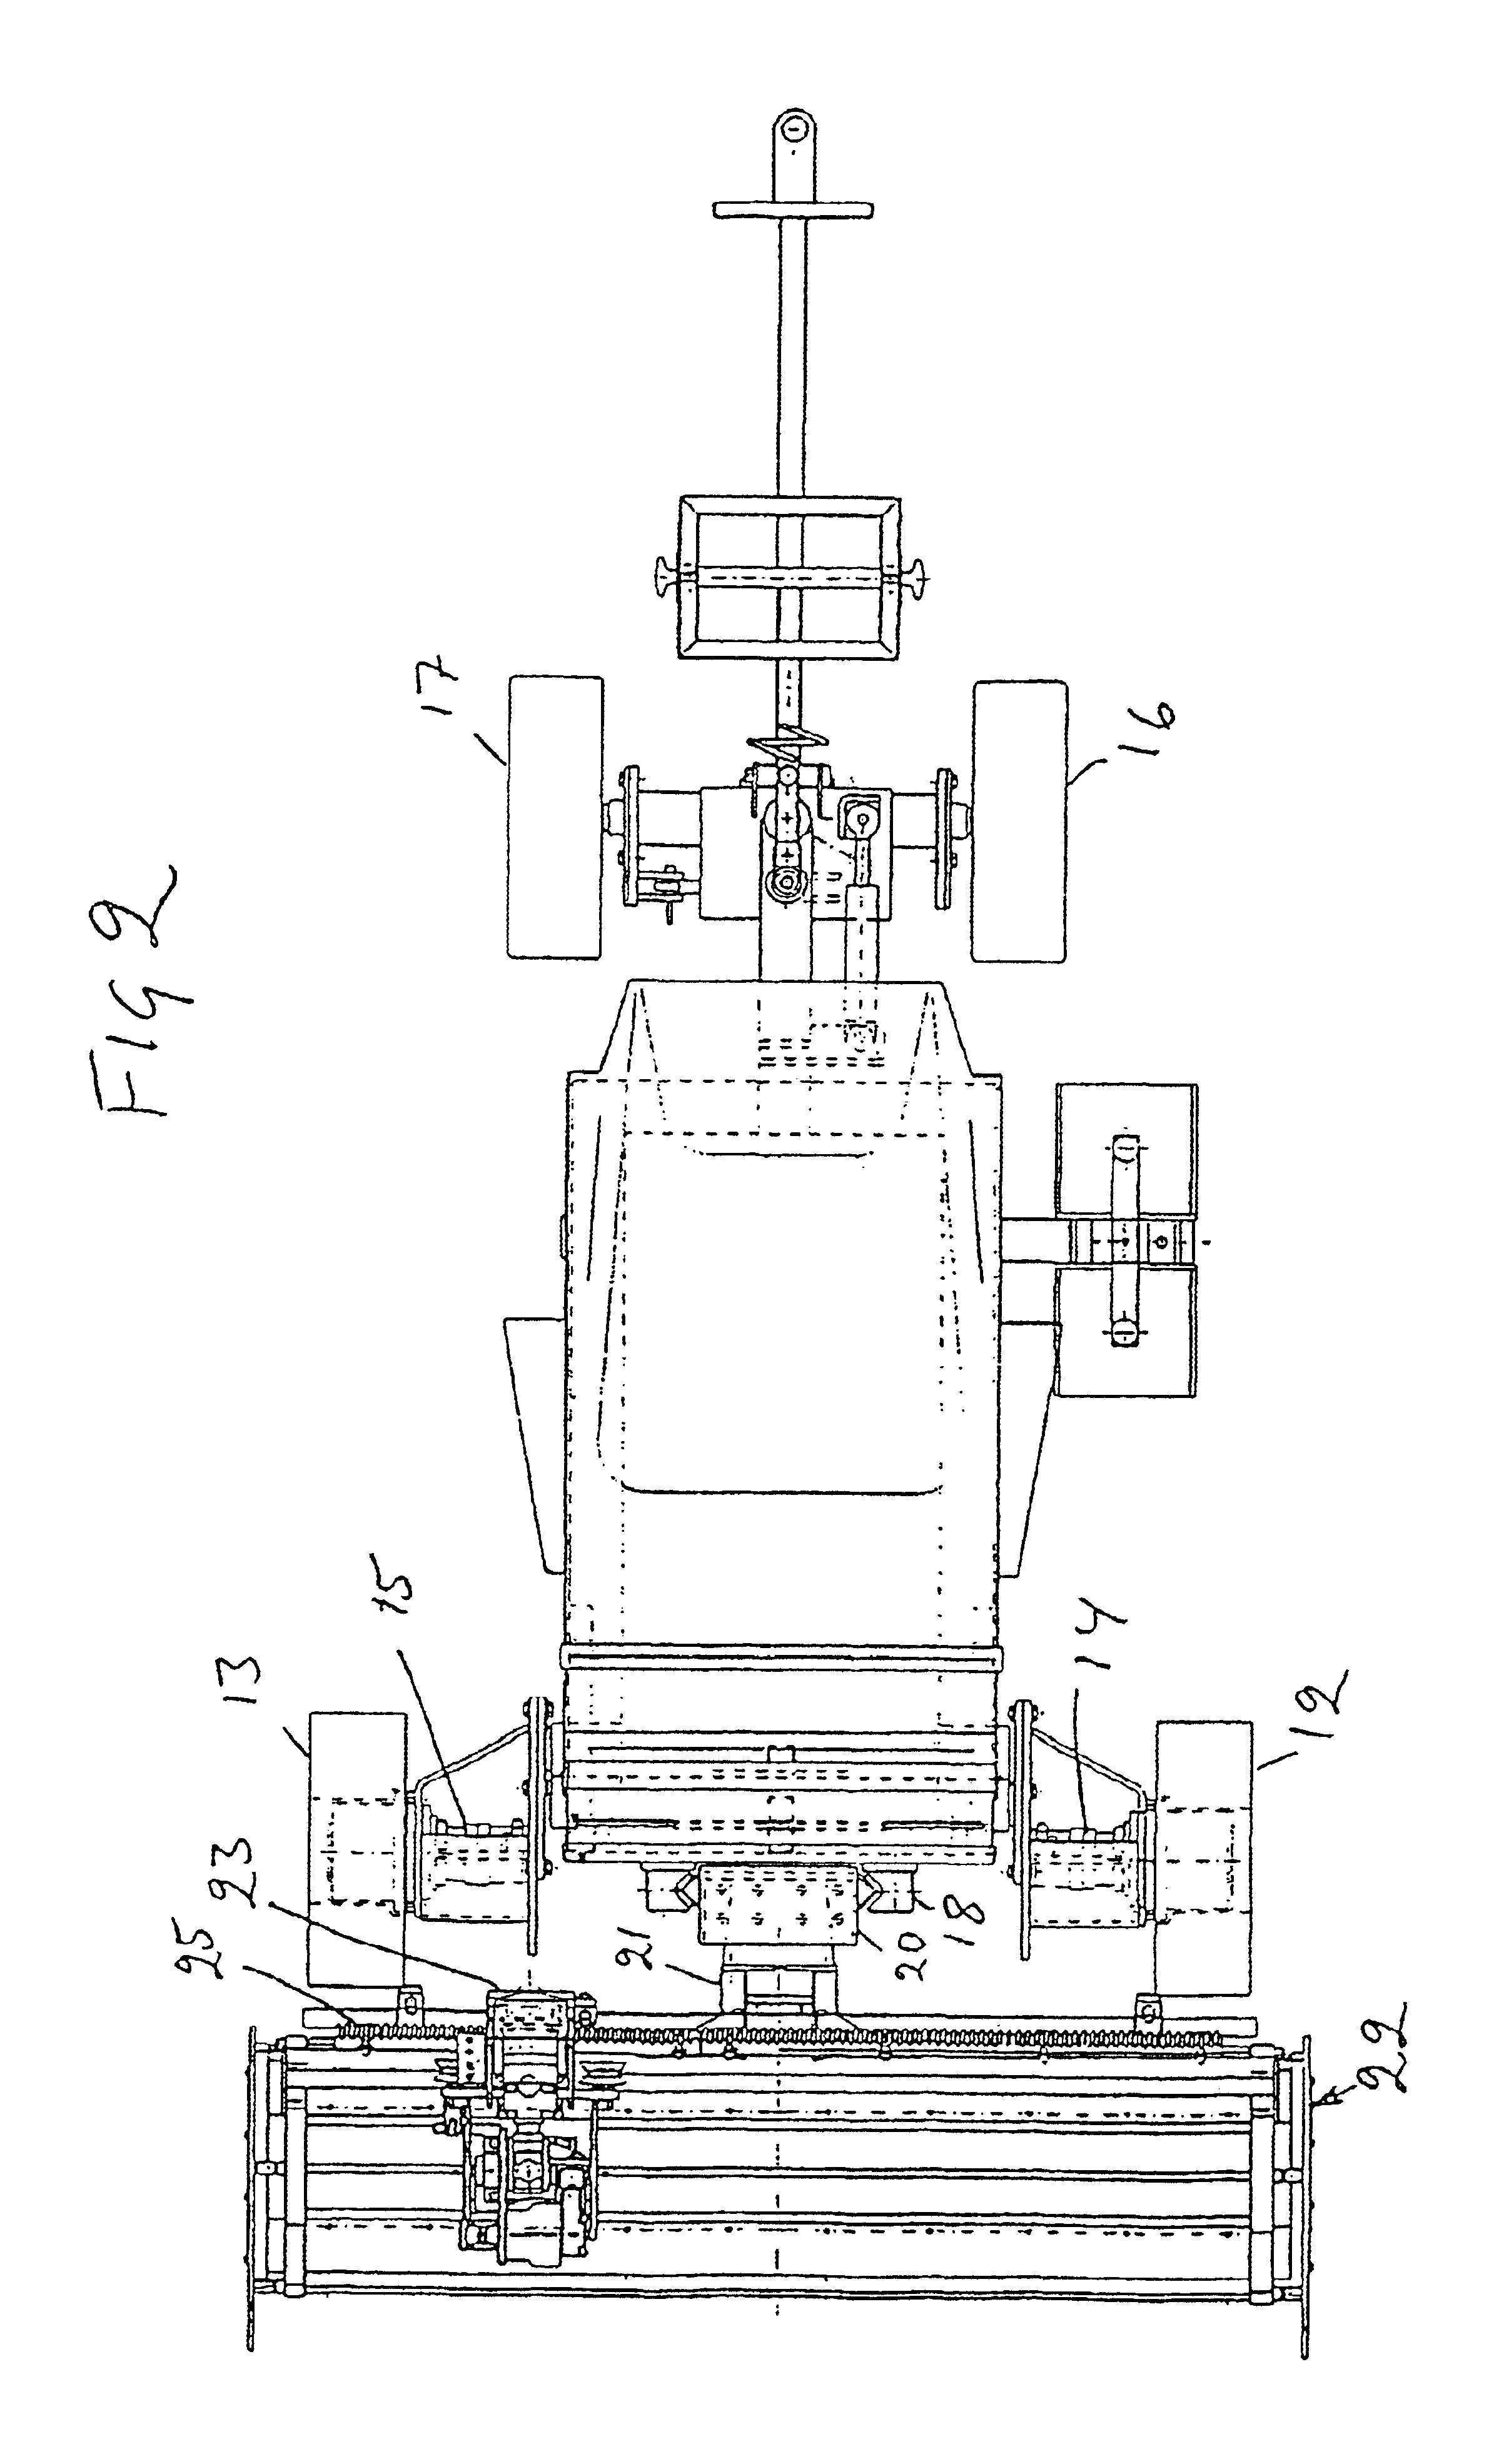 Method of working a concrete surface